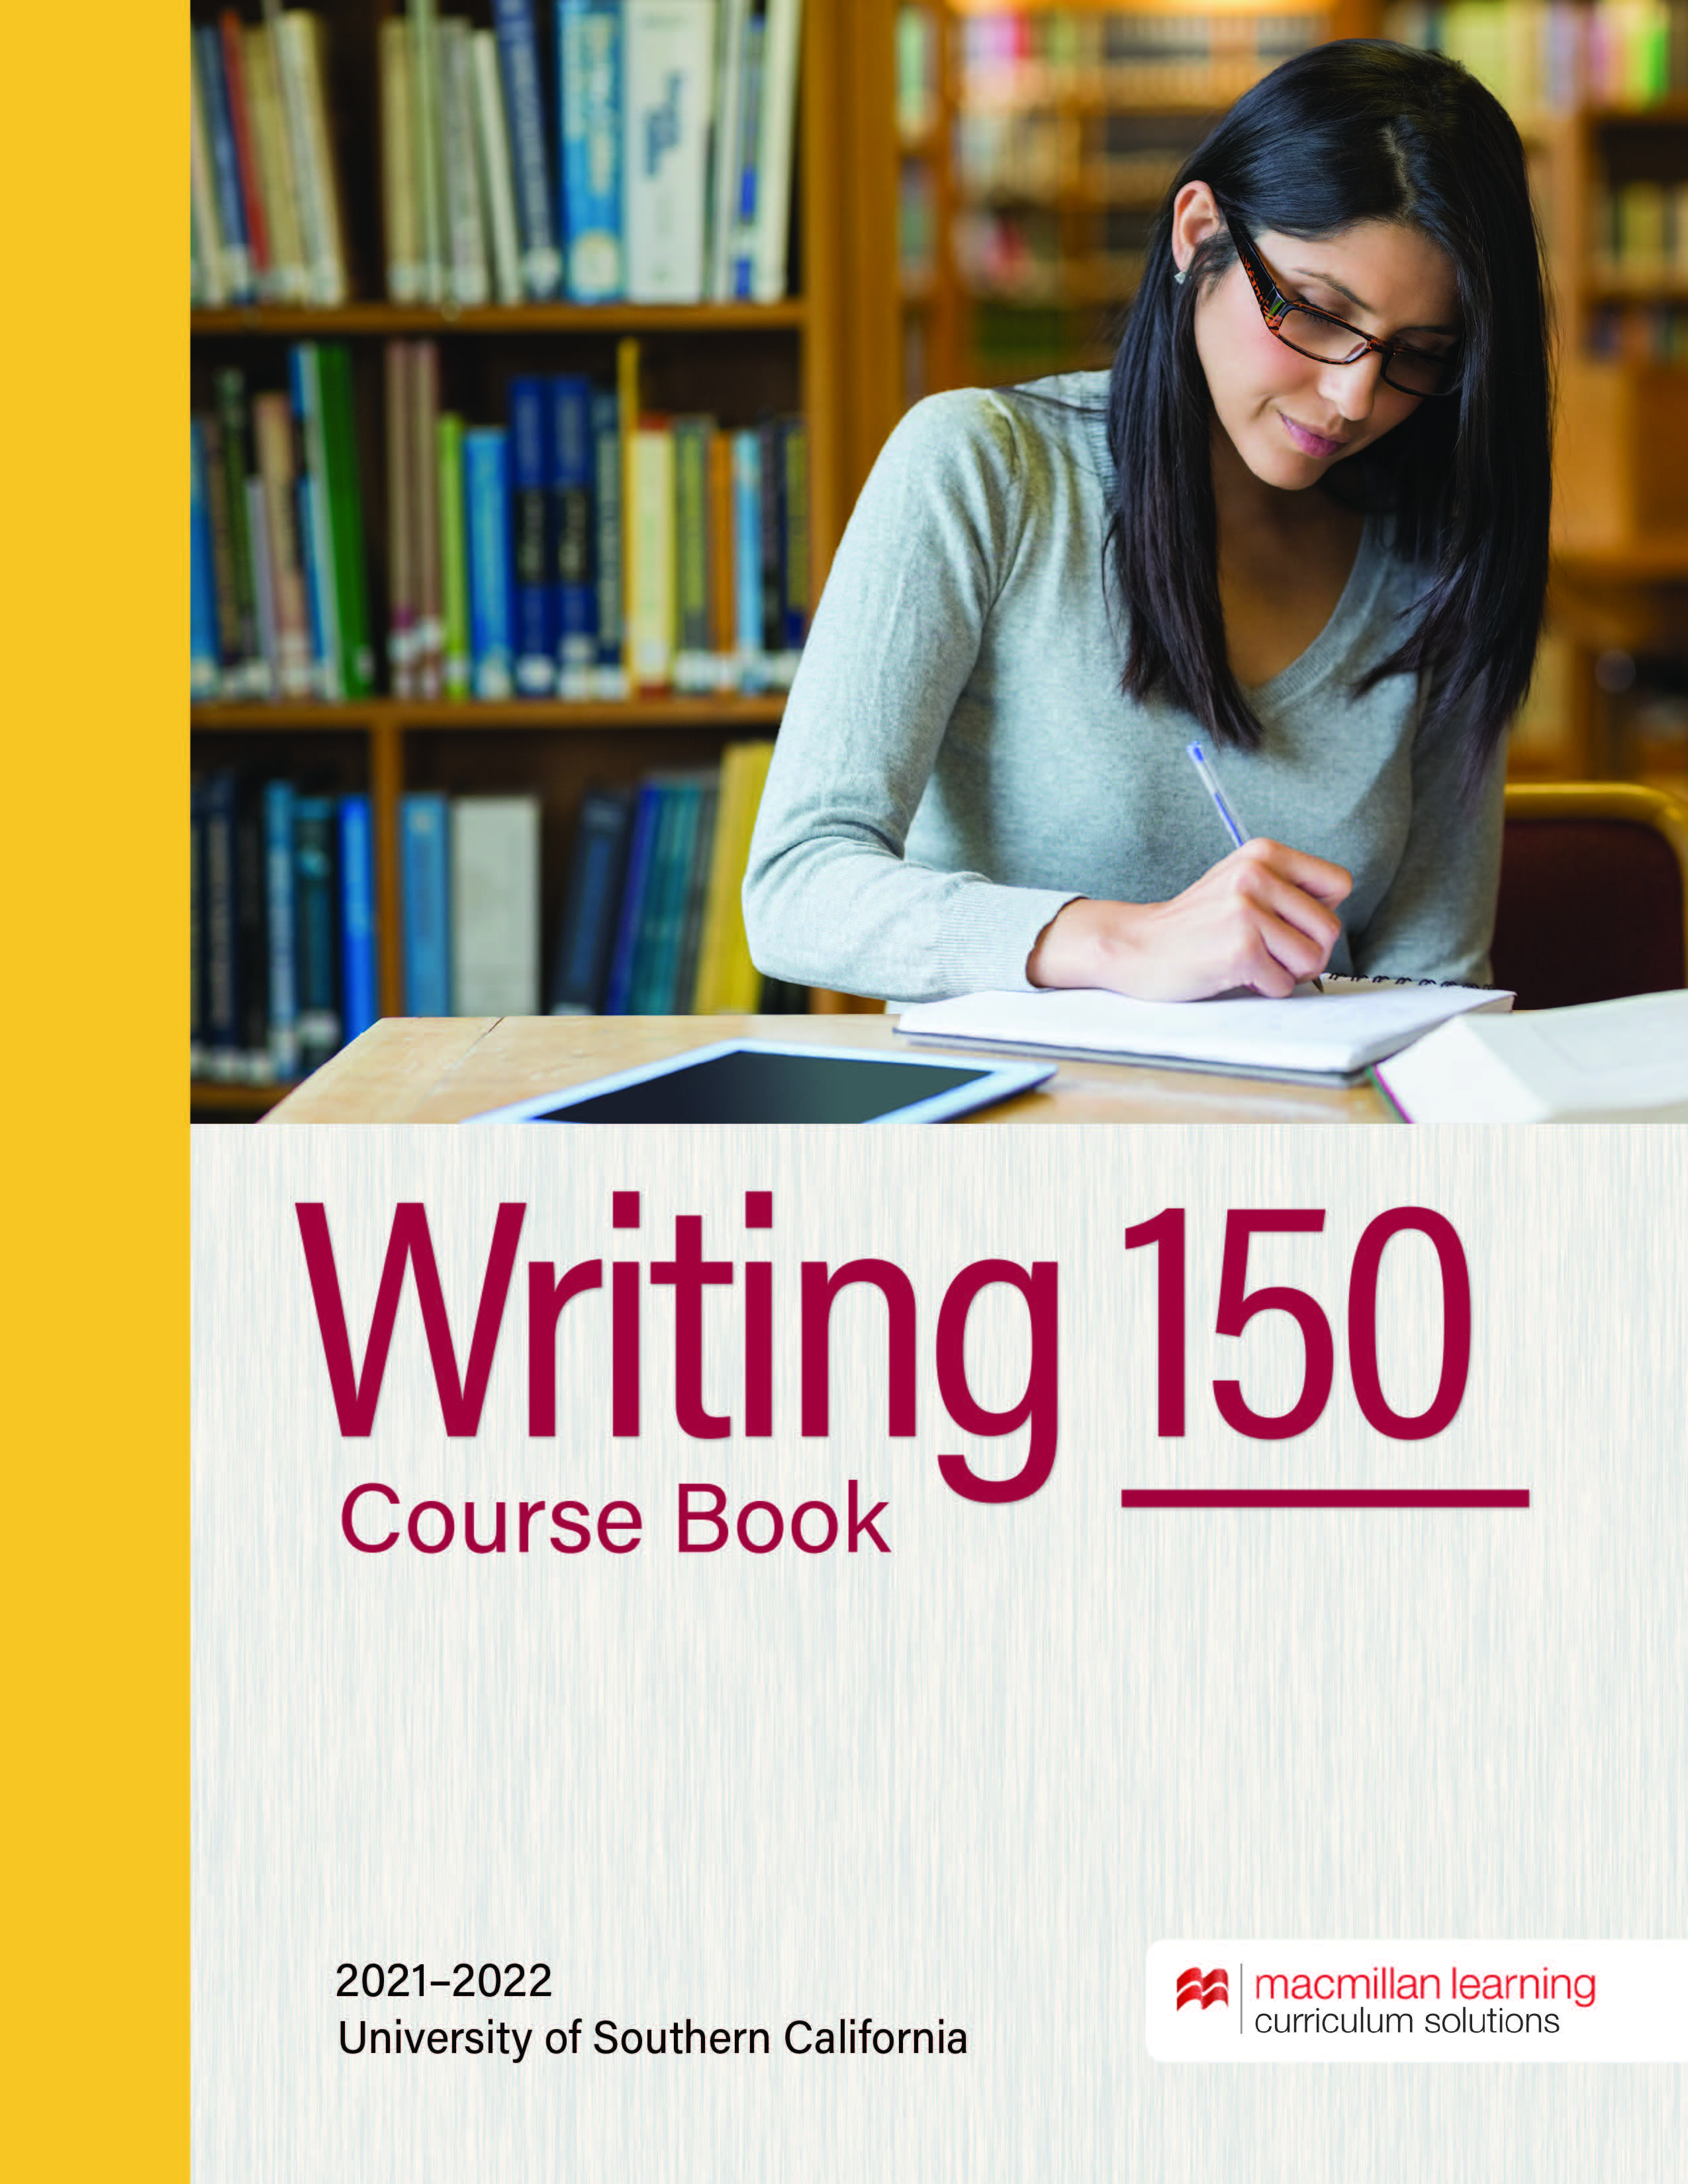 research and writing course